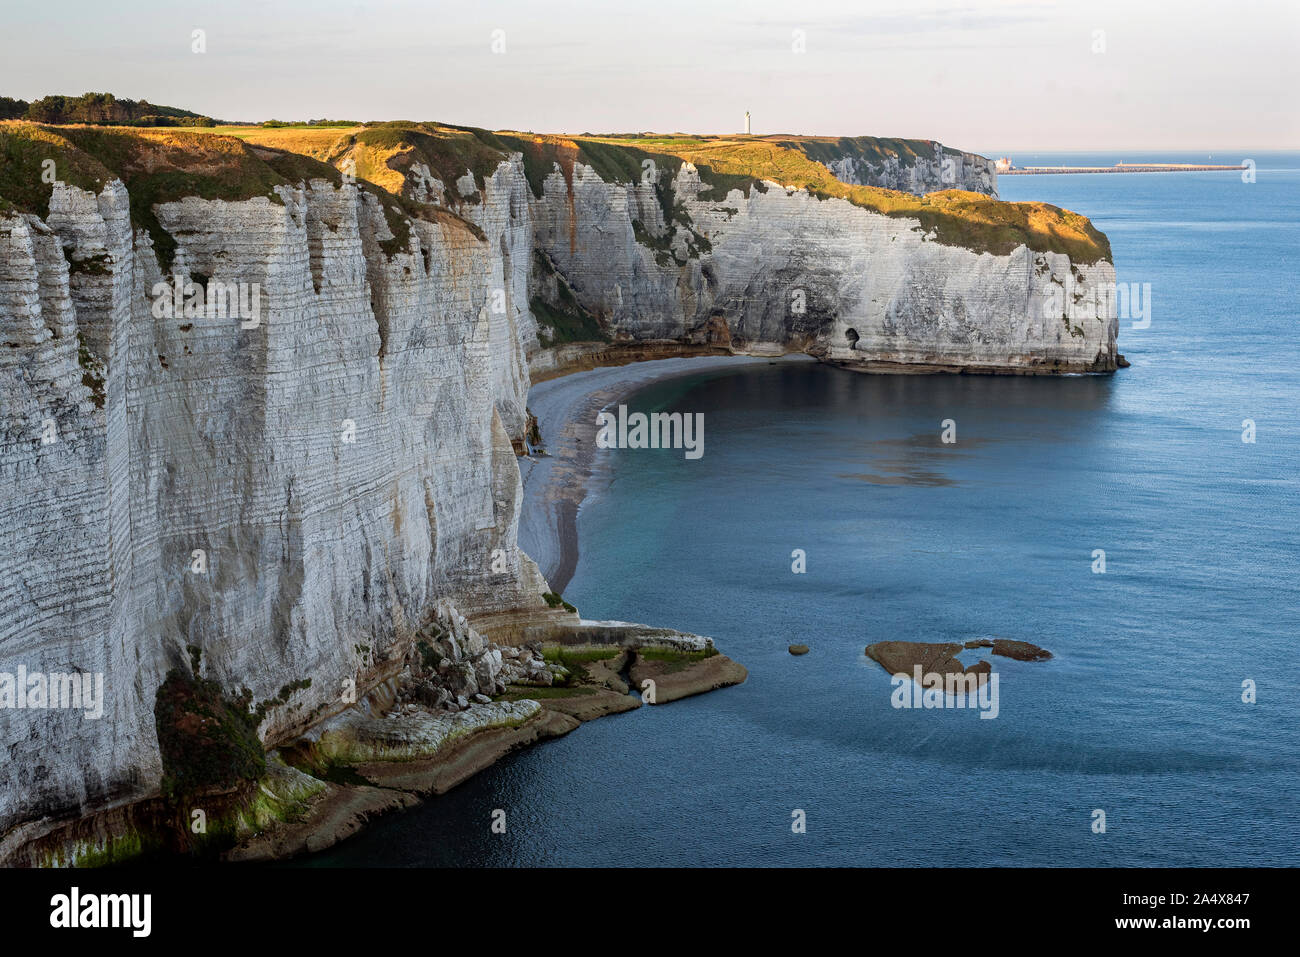 Cliffs of Etretat, Normandy, north of France, Europe. Stock Photo